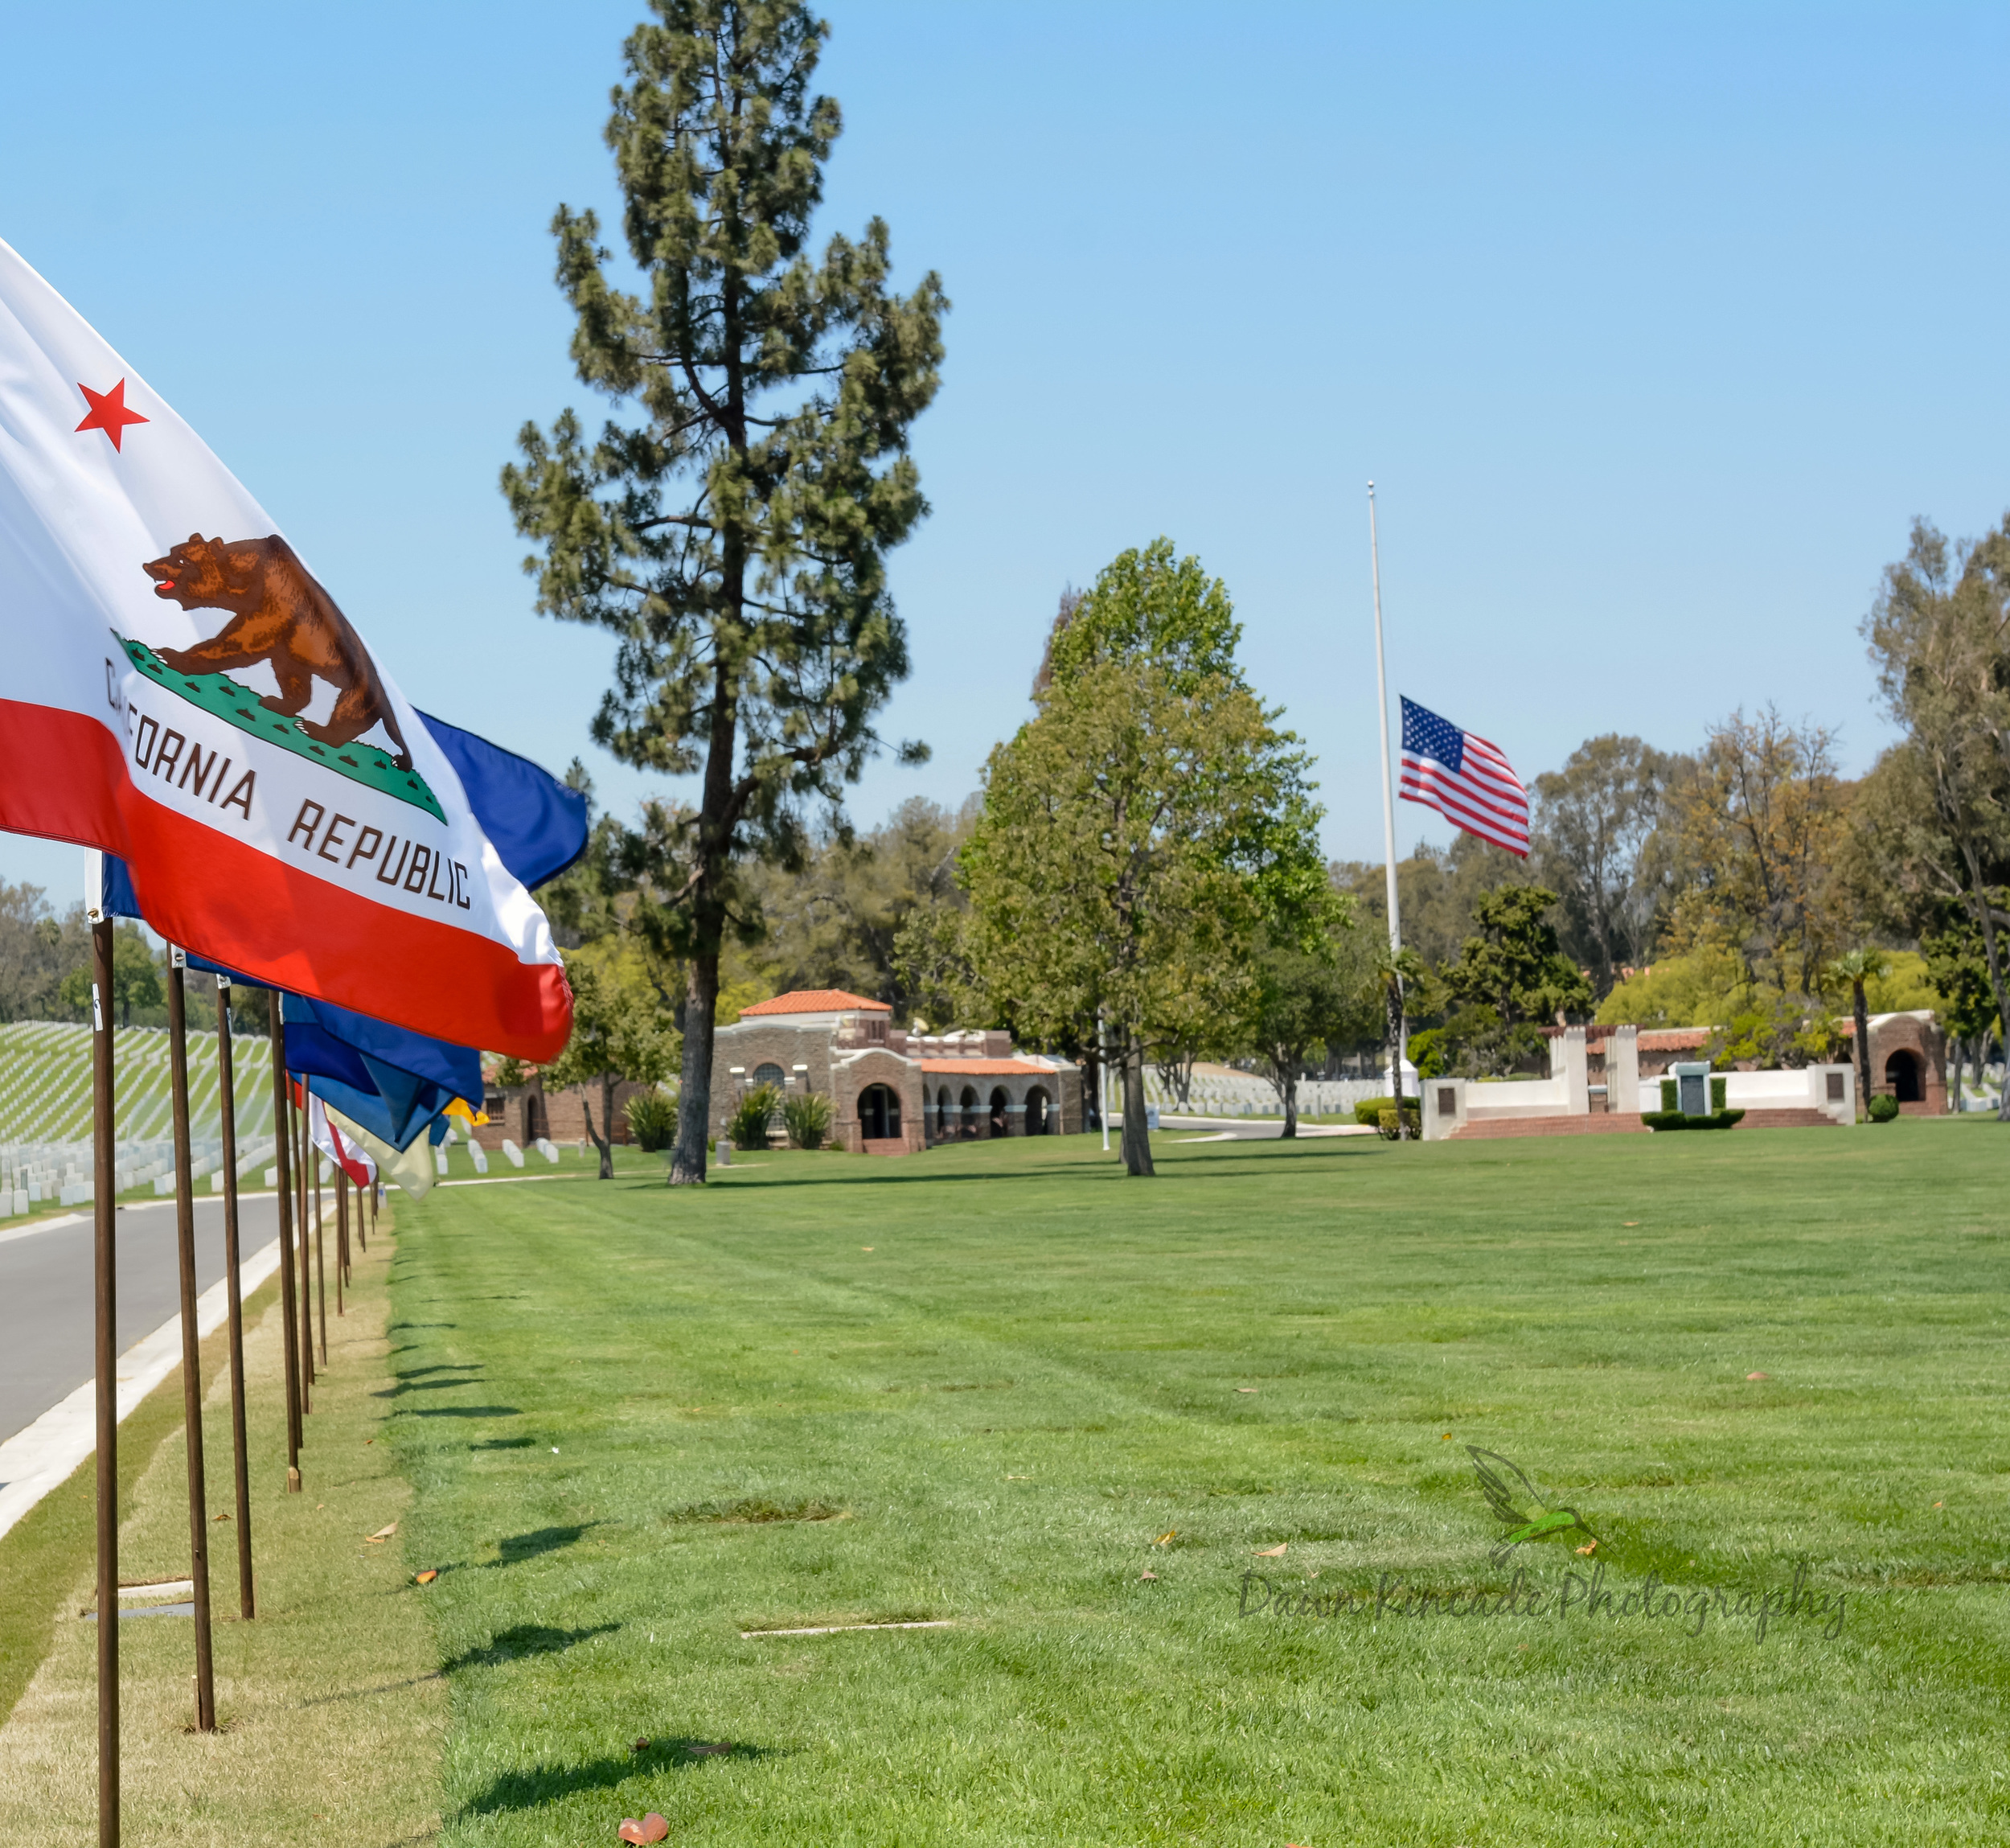 The American Flag flying at half staff at Los Angeles National Cemetery